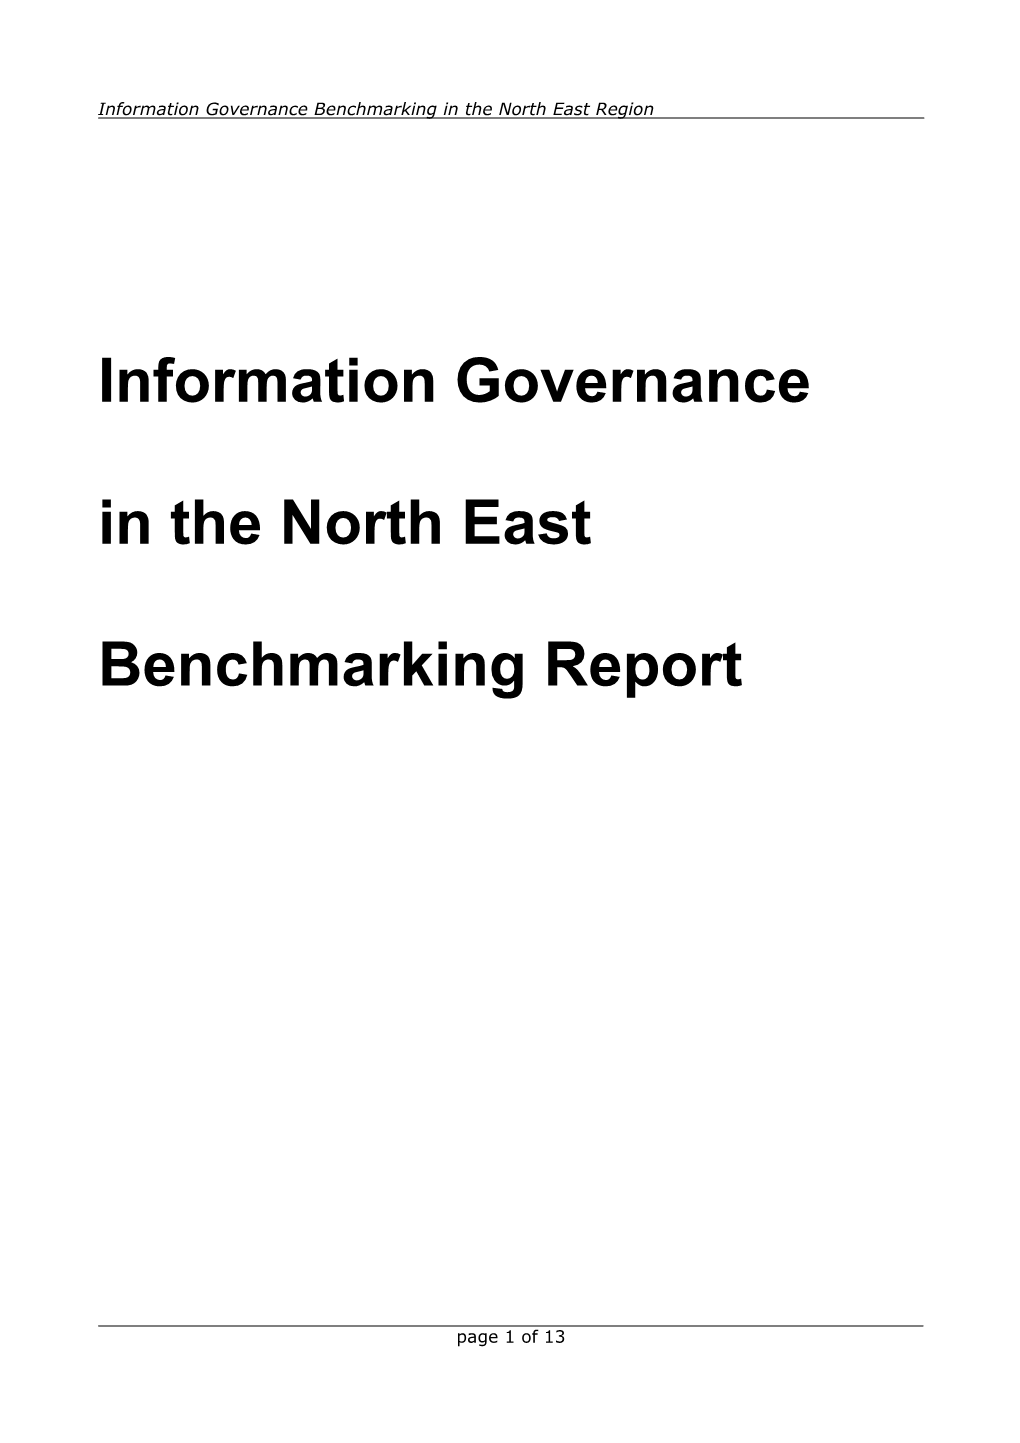 Information Governance in the North East Benchmarking Report